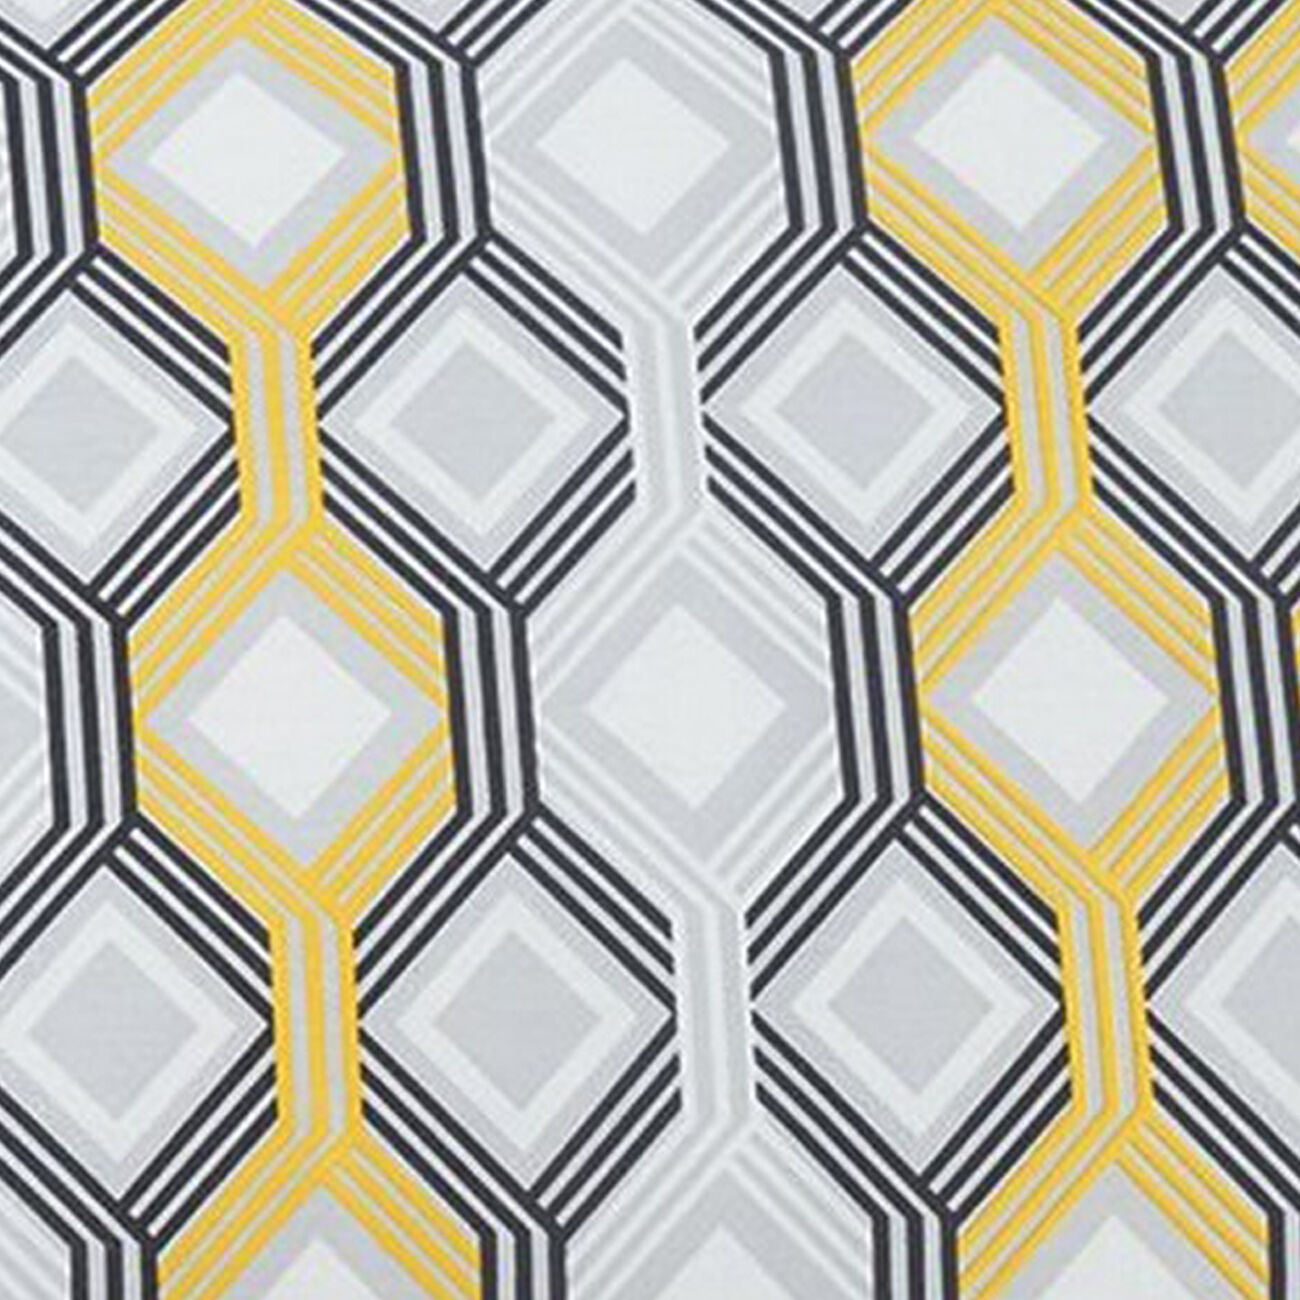 Fabric Queen Size Quilt Set with Diamond Pattern, Gray and Yellow